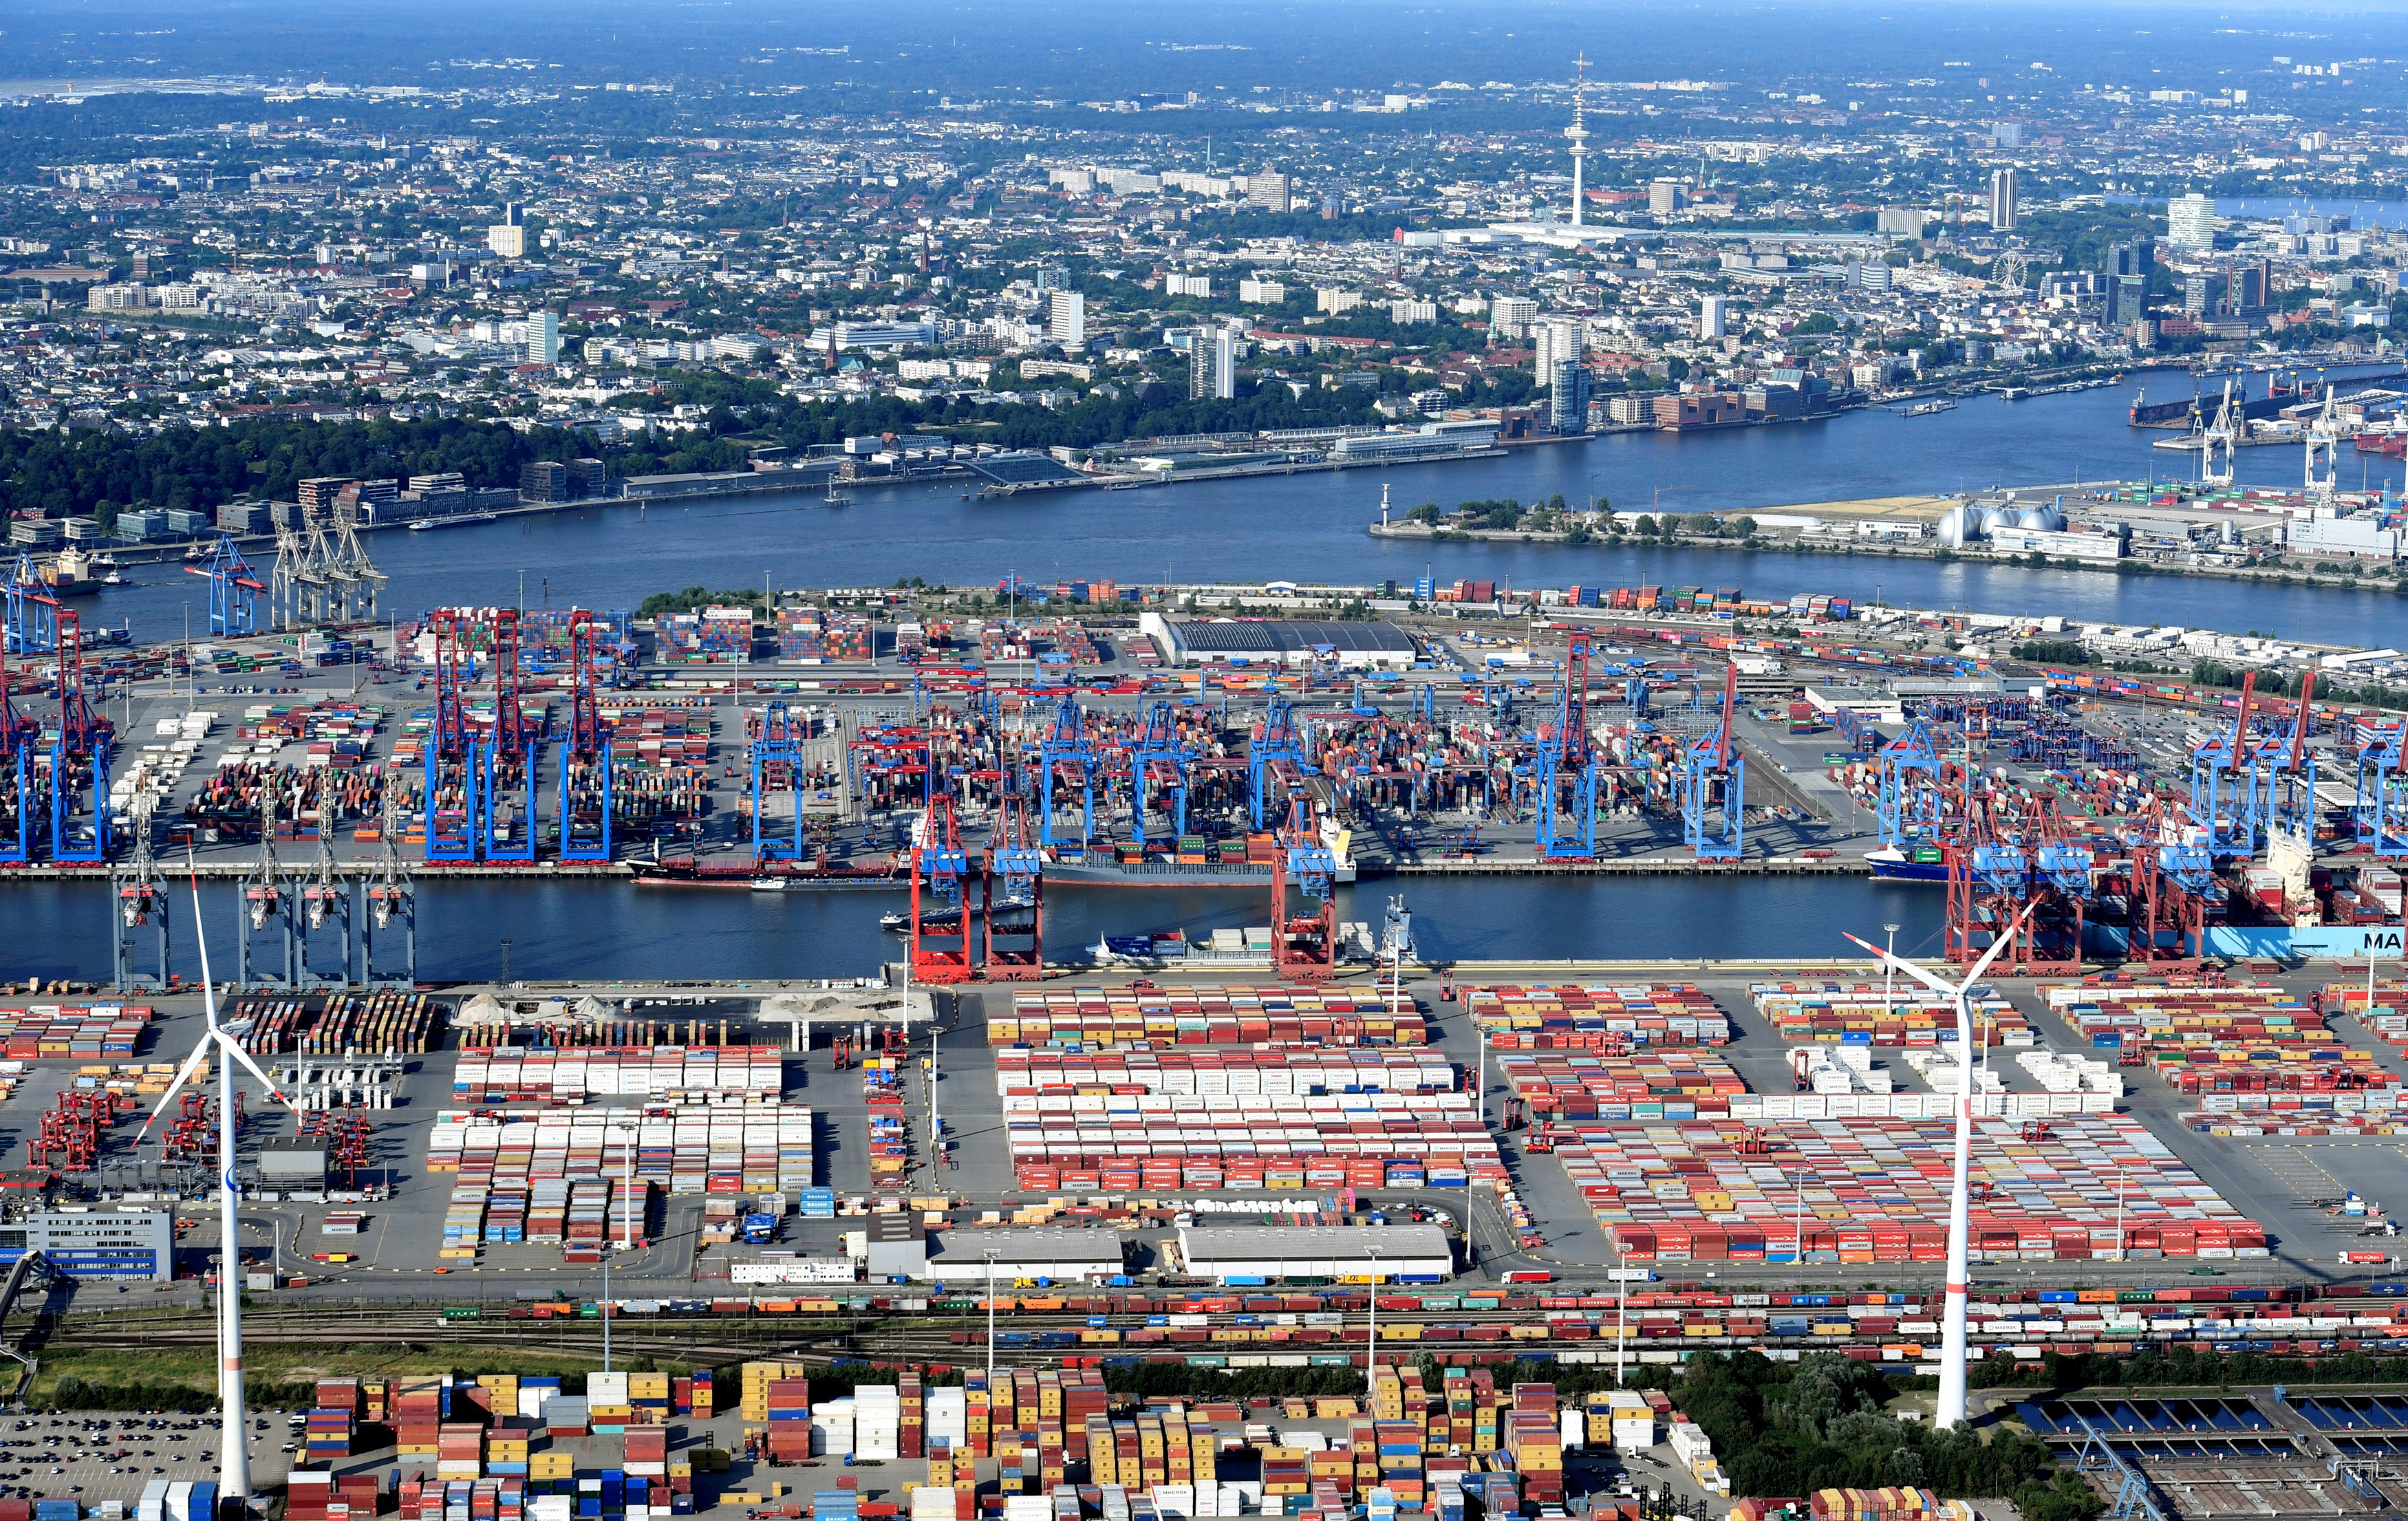 Aerial view of containers at a loading terminal in the port of Hamburg